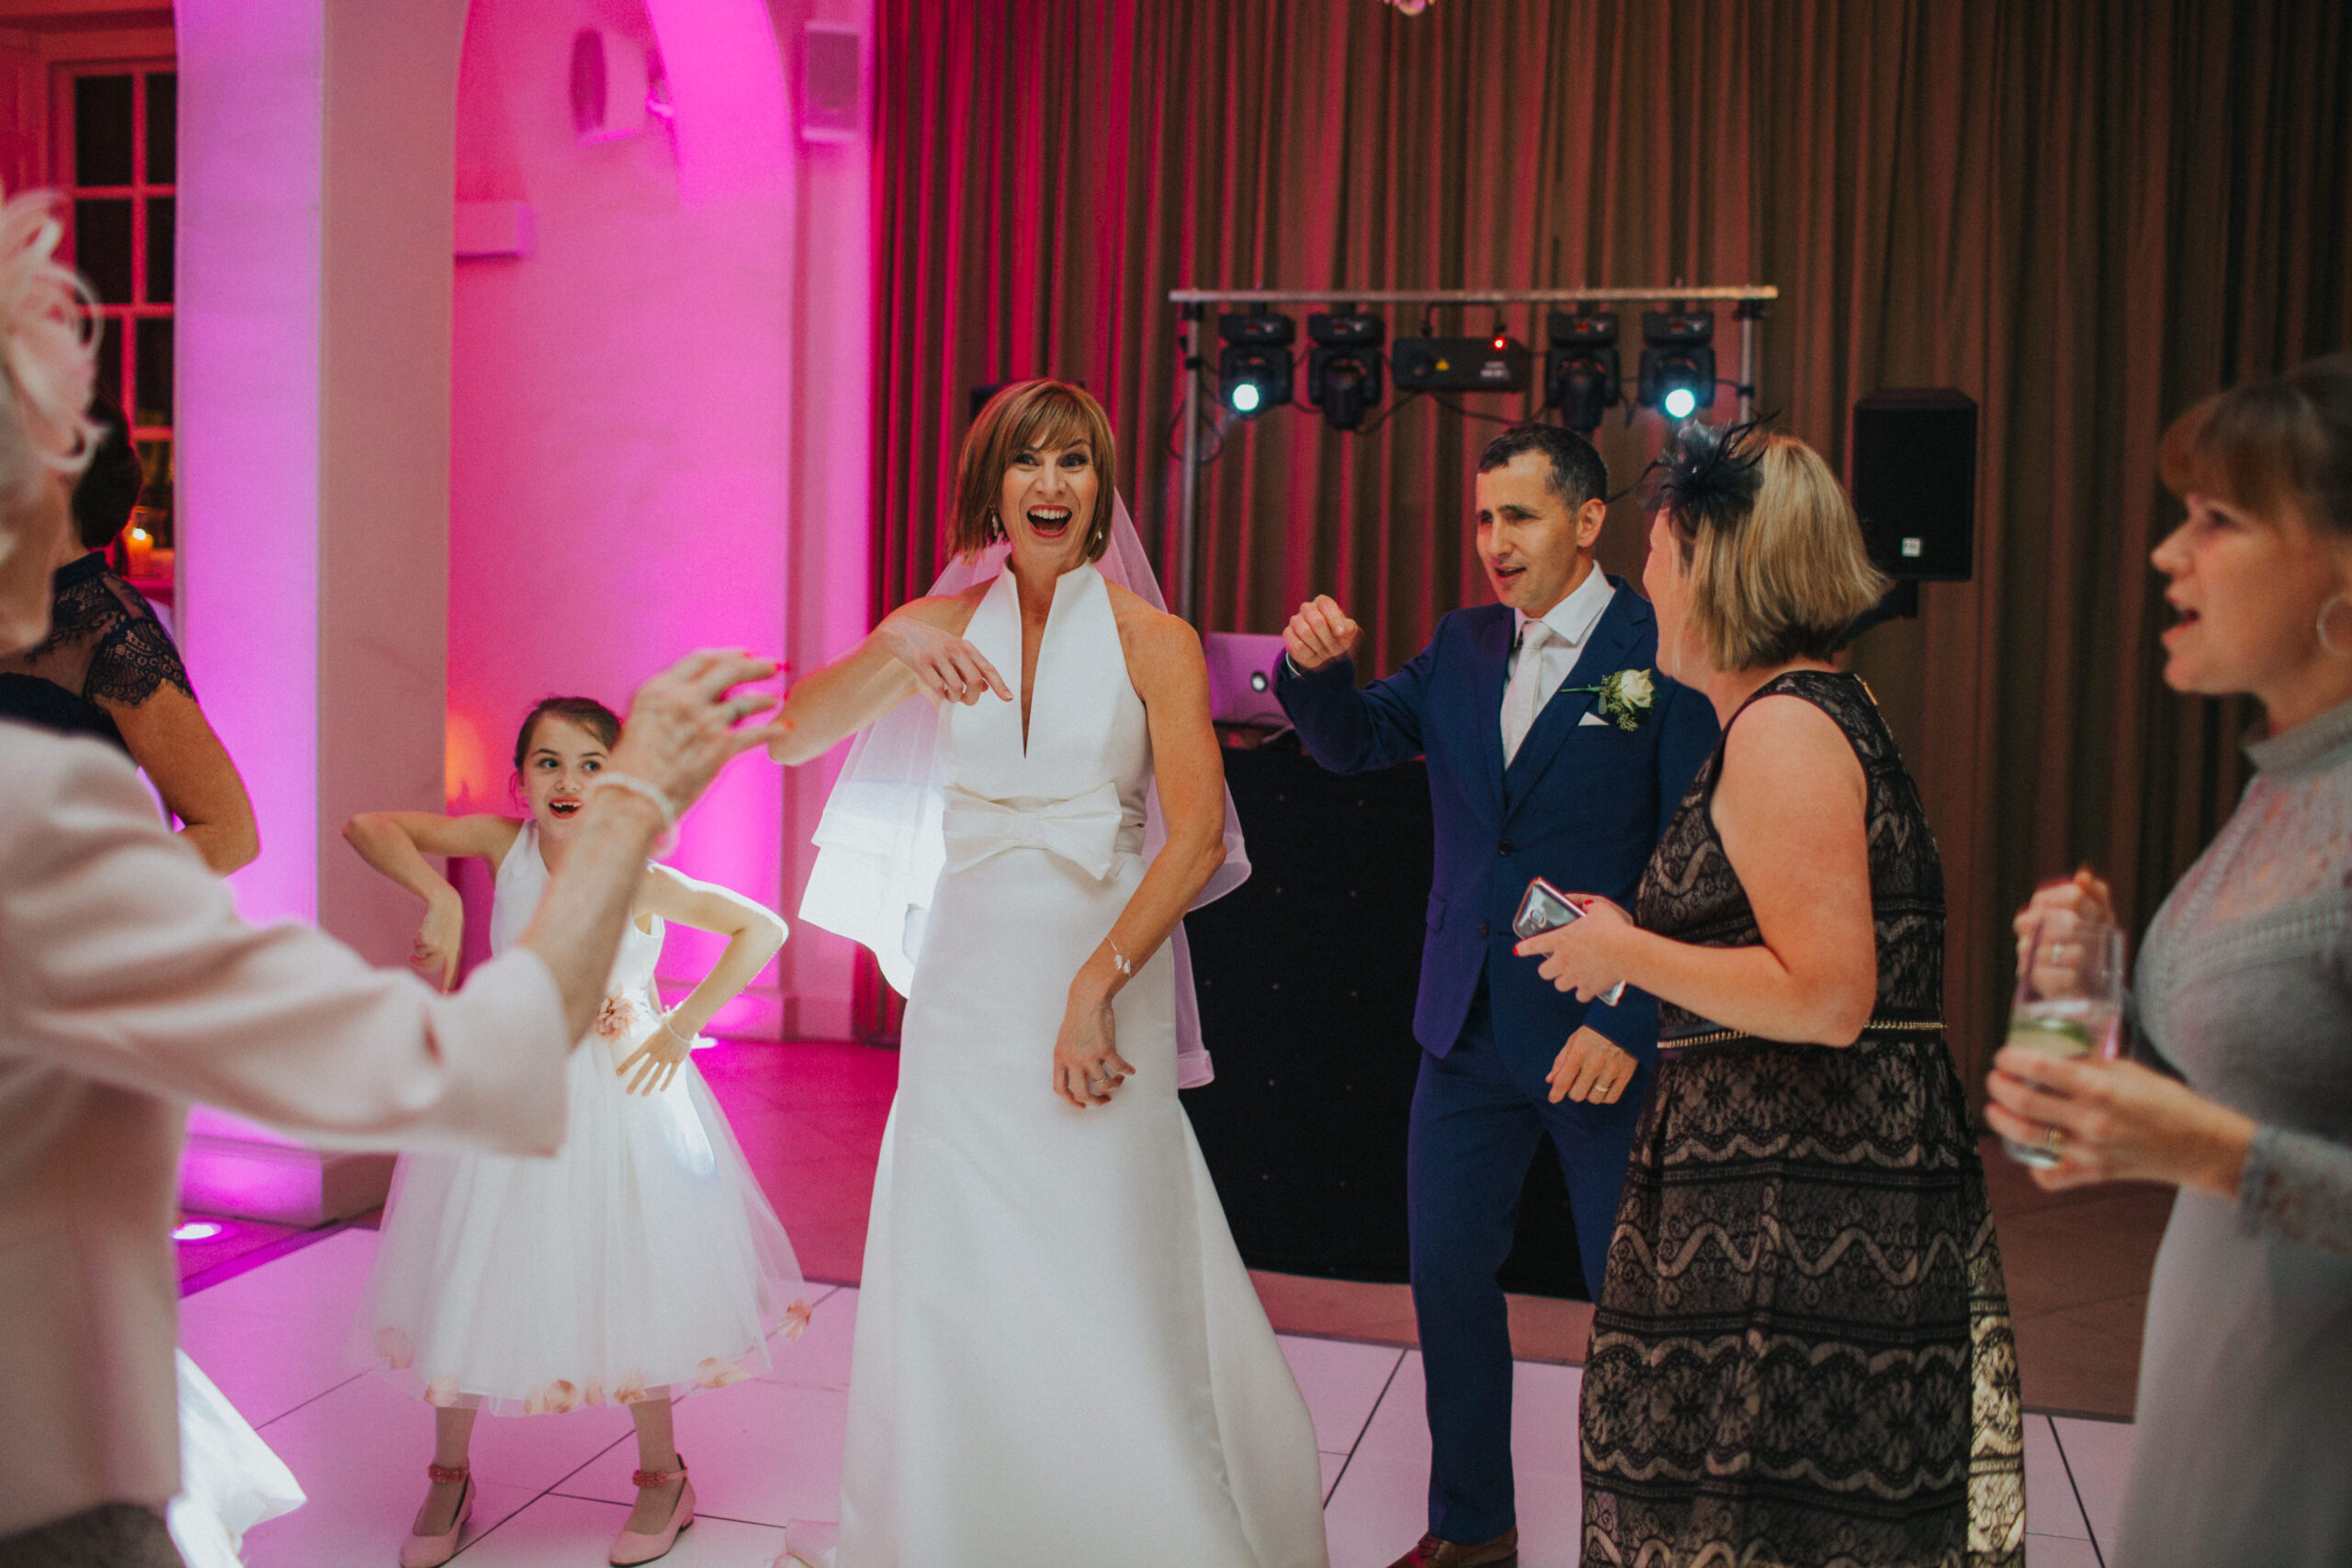 Bride and groom's joy shines through in the autumnal celebration at Iscoyd Park